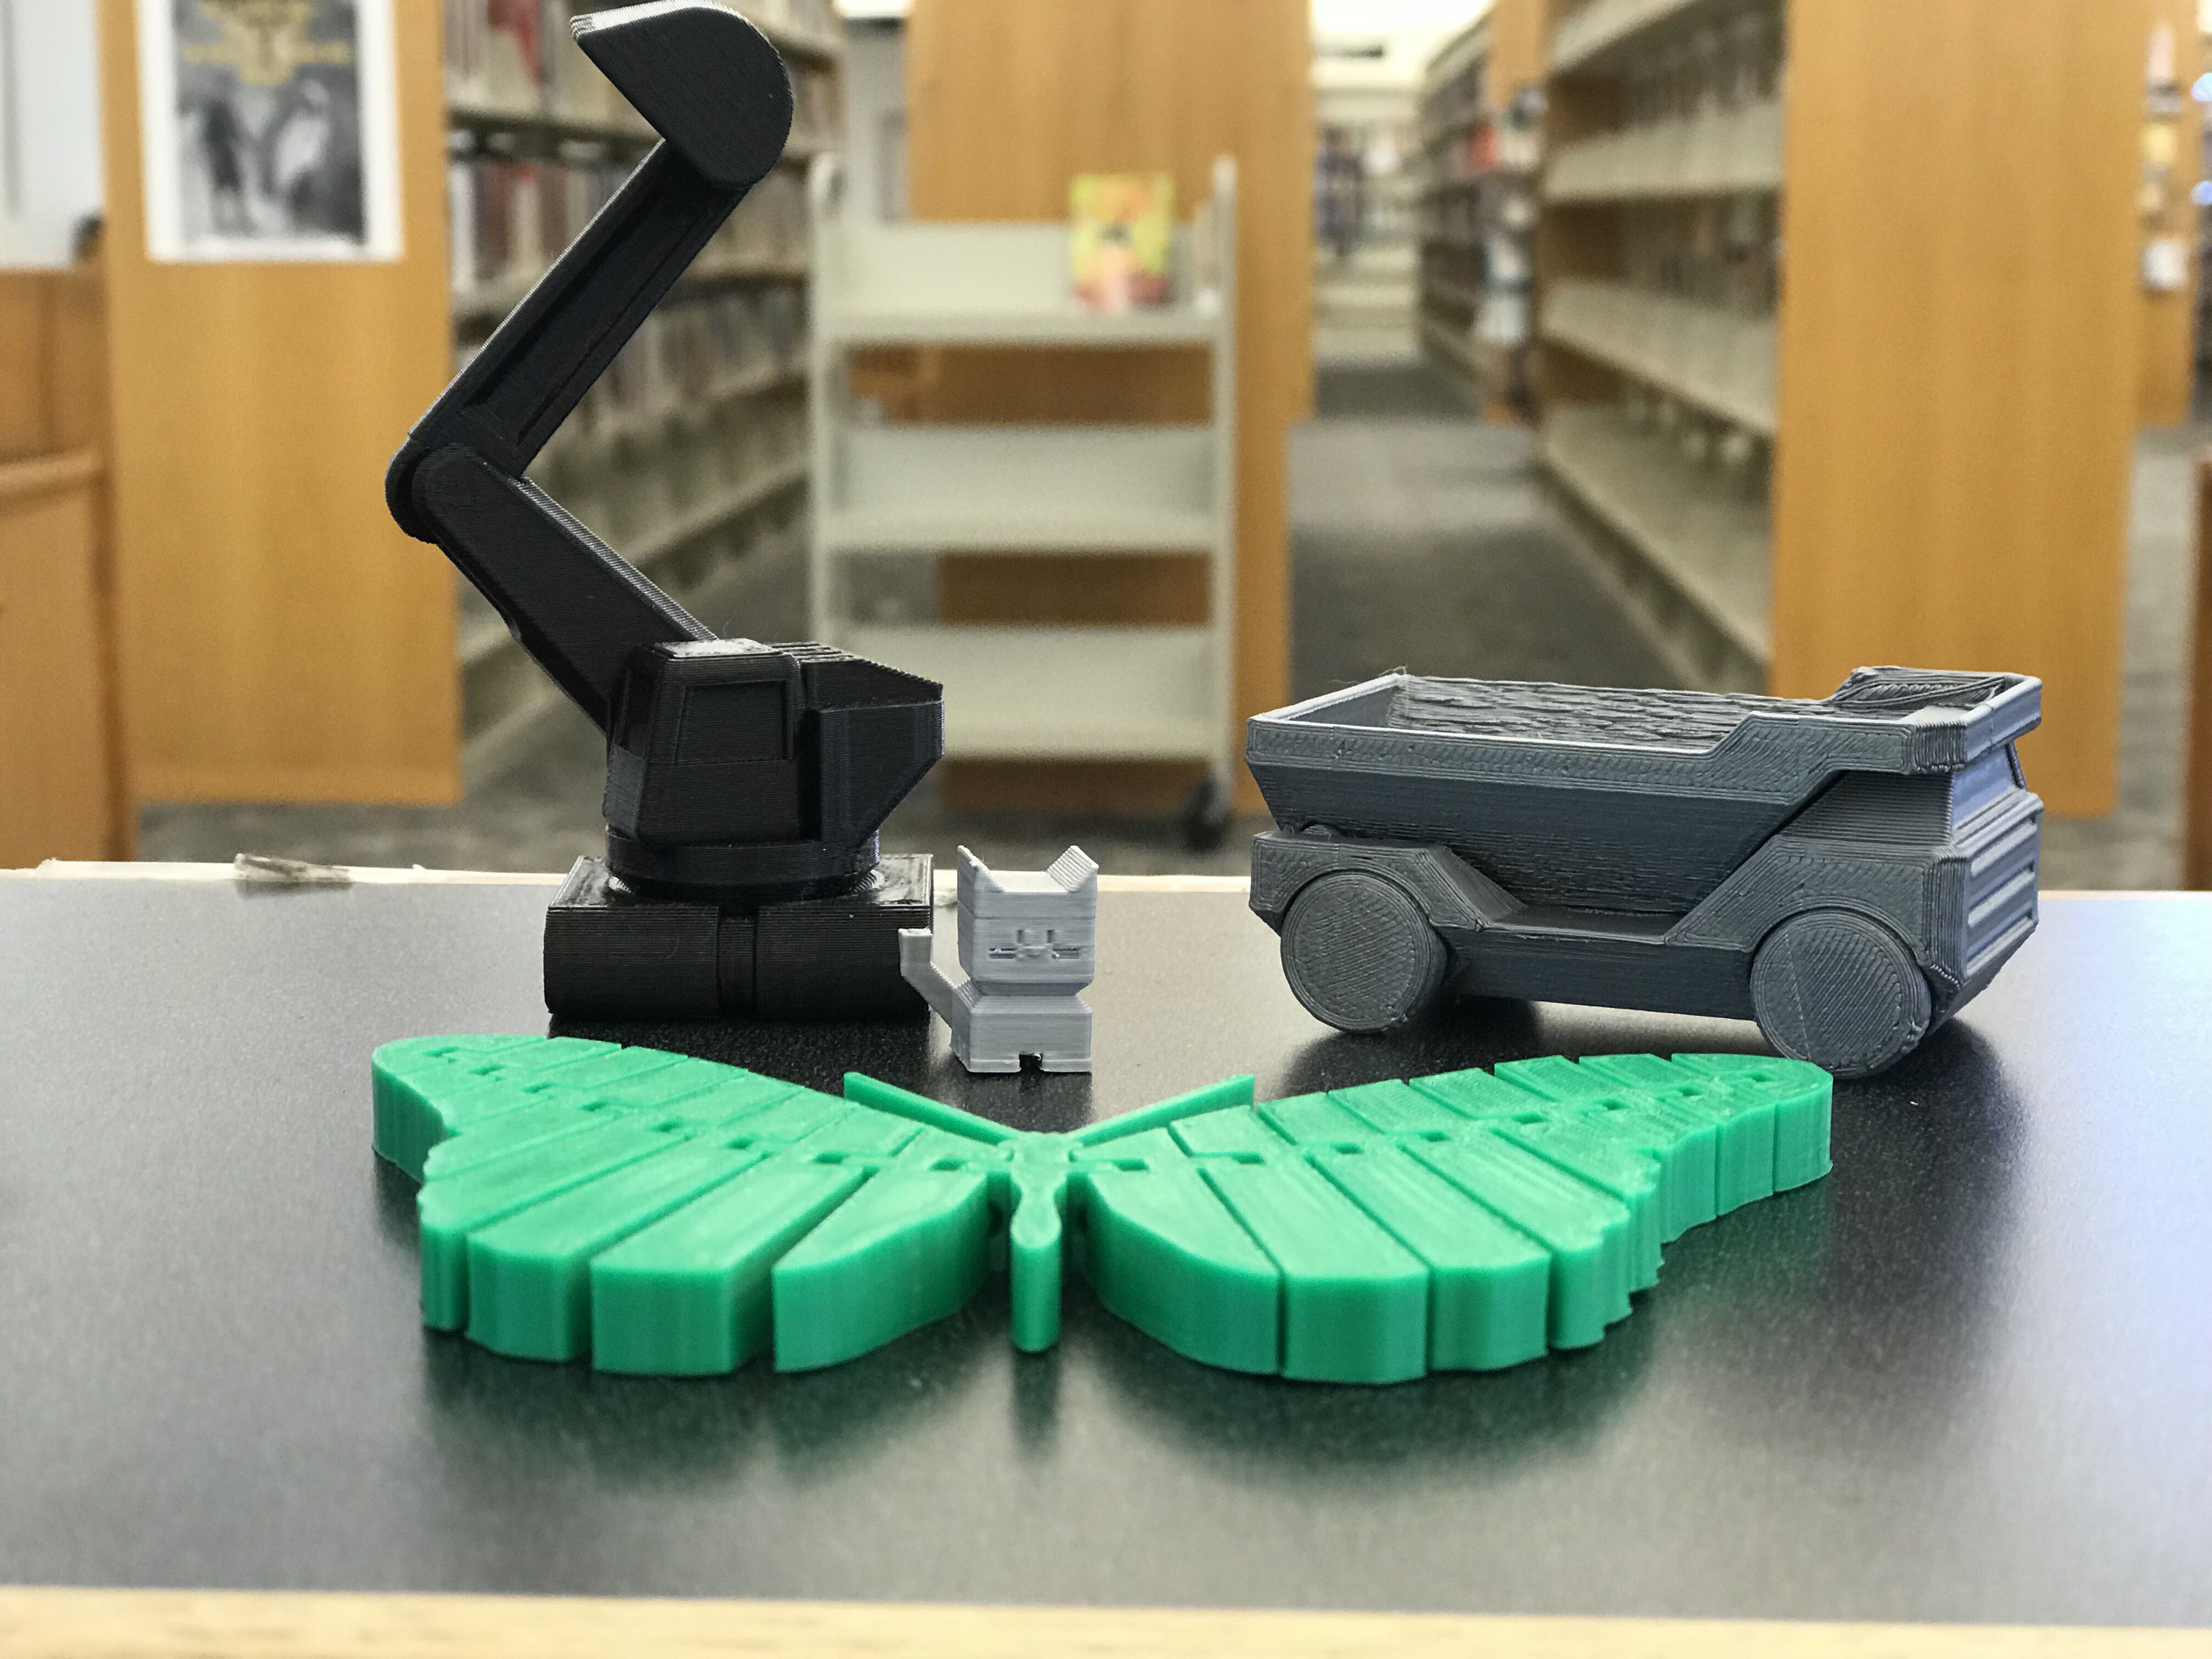 3D printed objects at Sienna Branch